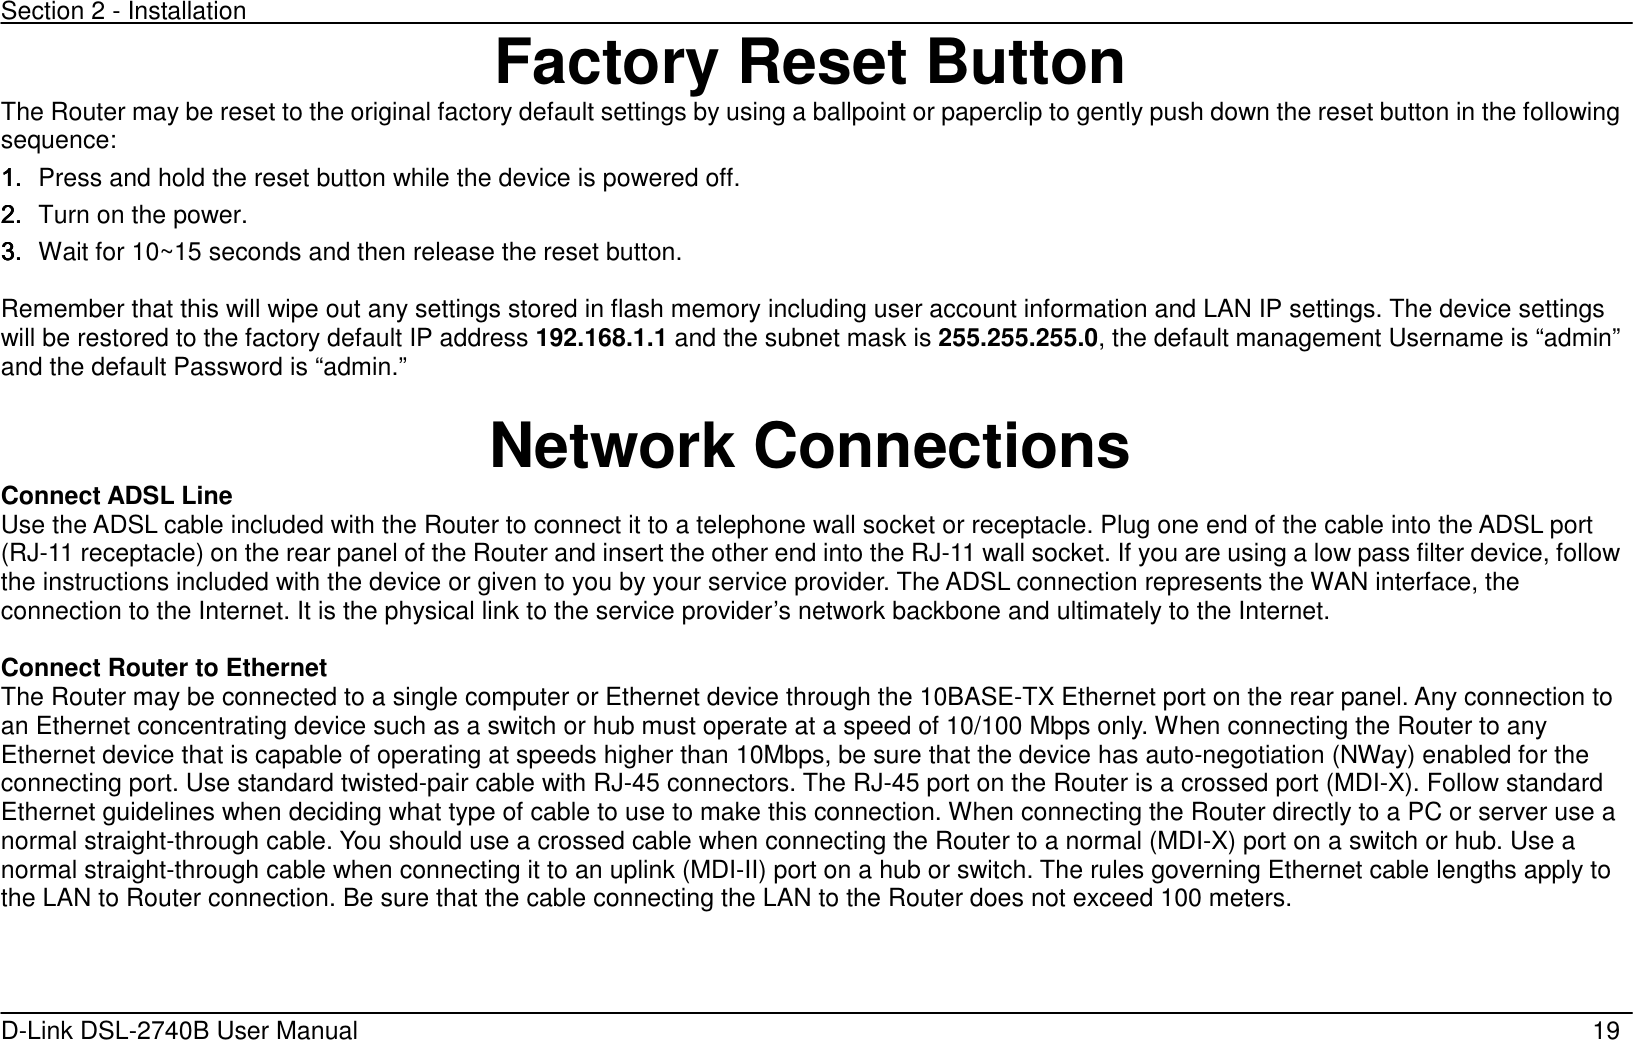 Section 2 - Installation   D-Link DSL-2740B User Manual                                                  19 Factory Reset Button The Router may be reset to the original factory default settings by using a ballpoint or paperclip to gently push down the reset button in the following sequence:   1.1.1.1. Press and hold the reset button while the device is powered off. 2.2.2.2. Turn on the power. 3.3.3.3. Wait for 10~15 seconds and then release the reset button.    Remember that this will wipe out any settings stored in flash memory including user account information and LAN IP settings. The device settings will be restored to the factory default IP address 192.168.1.1 and the subnet mask is 255.255.255.0, the default management Username is “admin” and the default Password is “admin.”  Network Connections   Connect ADSL Line Use the ADSL cable included with the Router to connect it to a telephone wall socket or receptacle. Plug one end of the cable into the ADSL port (RJ-11 receptacle) on the rear panel of the Router and insert the other end into the RJ-11 wall socket. If you are using a low pass filter device, follow the instructions included with the device or given to you by your service provider. The ADSL connection represents the WAN interface, the connection to the Internet. It is the physical link to the service provider’s network backbone and ultimately to the Internet.    Connect Router to Ethernet   The Router may be connected to a single computer or Ethernet device through the 10BASE-TX Ethernet port on the rear panel. Any connection to an Ethernet concentrating device such as a switch or hub must operate at a speed of 10/100 Mbps only. When connecting the Router to any Ethernet device that is capable of operating at speeds higher than 10Mbps, be sure that the device has auto-negotiation (NWay) enabled for the connecting port. Use standard twisted-pair cable with RJ-45 connectors. The RJ-45 port on the Router is a crossed port (MDI-X). Follow standard Ethernet guidelines when deciding what type of cable to use to make this connection. When connecting the Router directly to a PC or server use a normal straight-through cable. You should use a crossed cable when connecting the Router to a normal (MDI-X) port on a switch or hub. Use a normal straight-through cable when connecting it to an uplink (MDI-II) port on a hub or switch. The rules governing Ethernet cable lengths apply to the LAN to Router connection. Be sure that the cable connecting the LAN to the Router does not exceed 100 meters.  